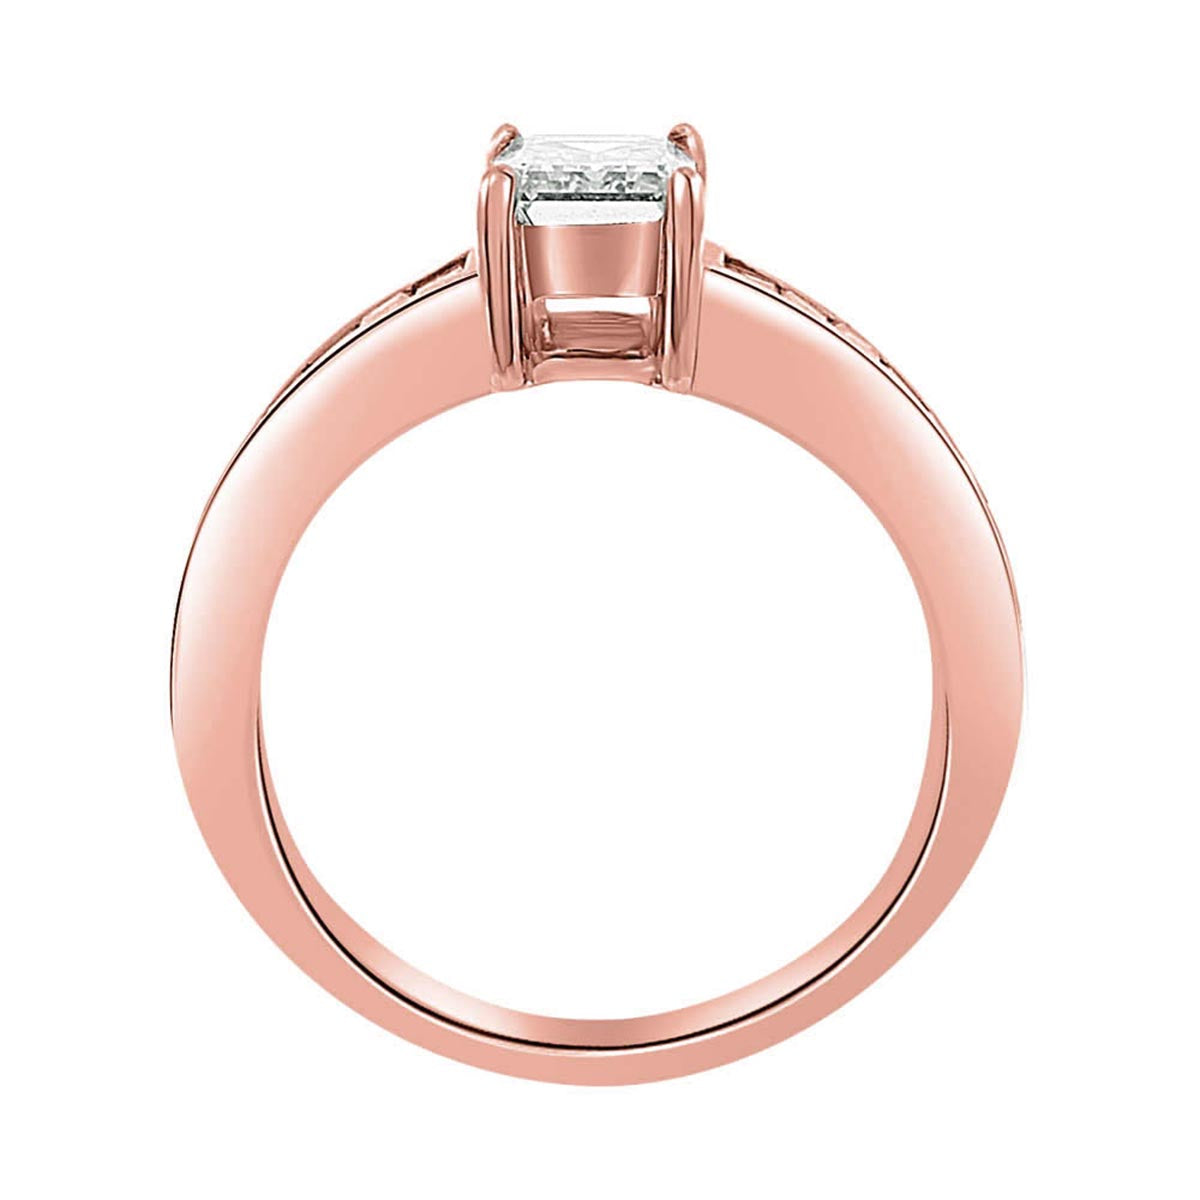 Emerald Cut Engagement Ring made from rose gold standing uprigt